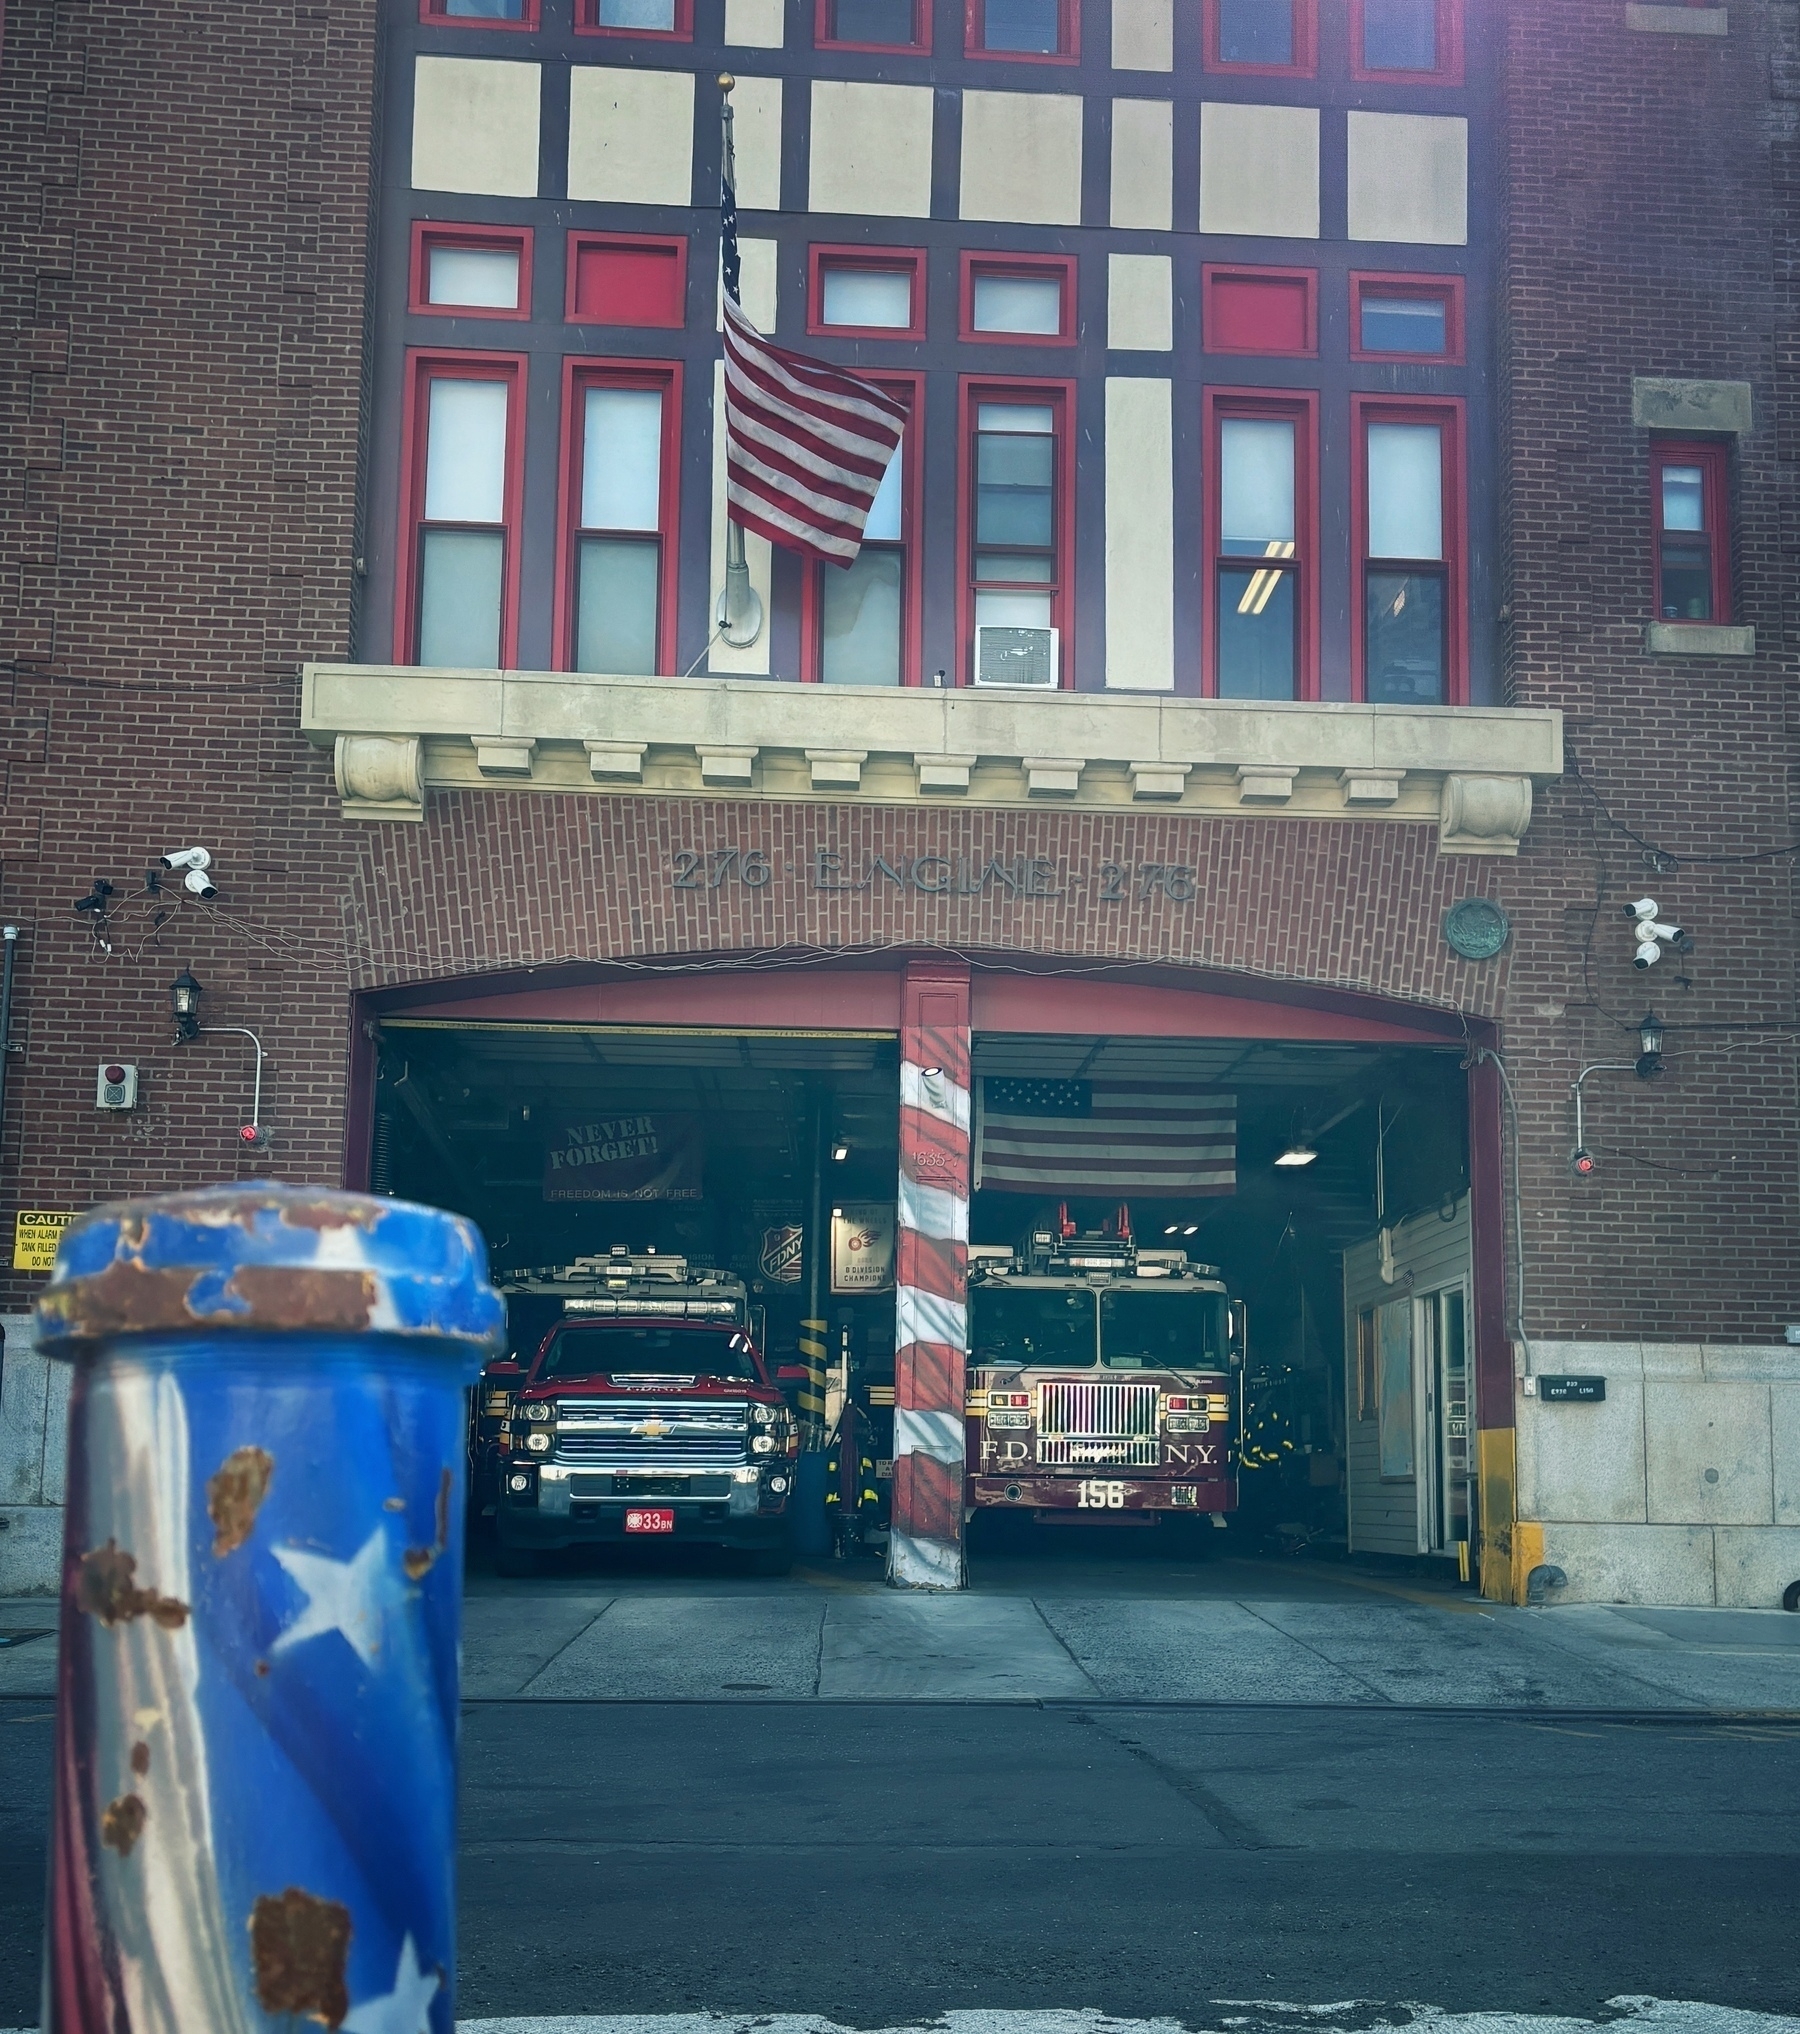 A fire station with an American flag and two fire trucks parked inside is visible behind a blue and white star-spangled bollard.